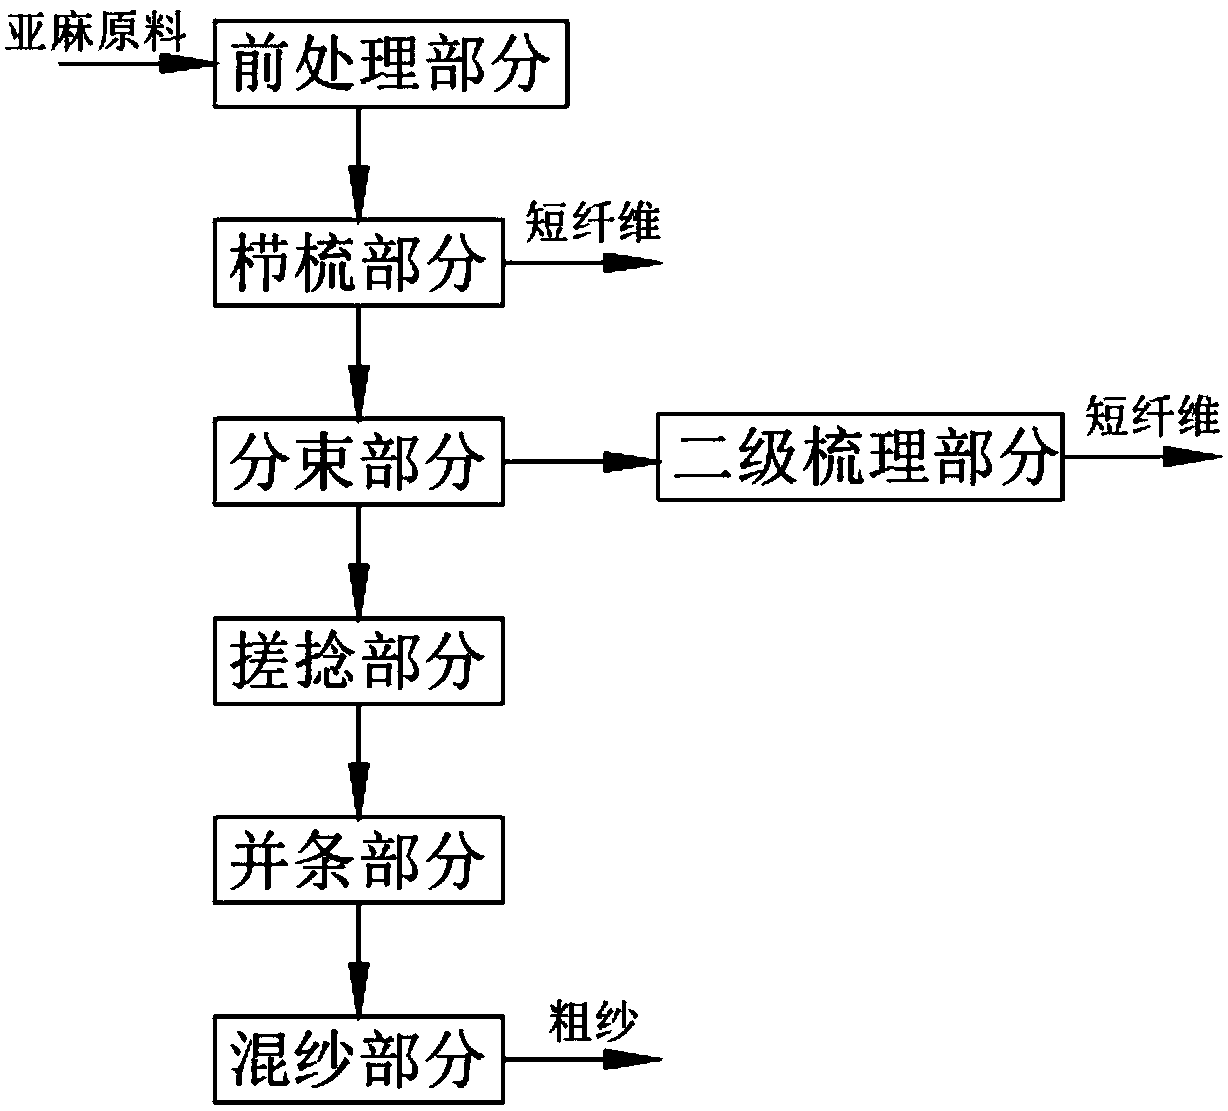 Continuous automatic production method of linen yarn